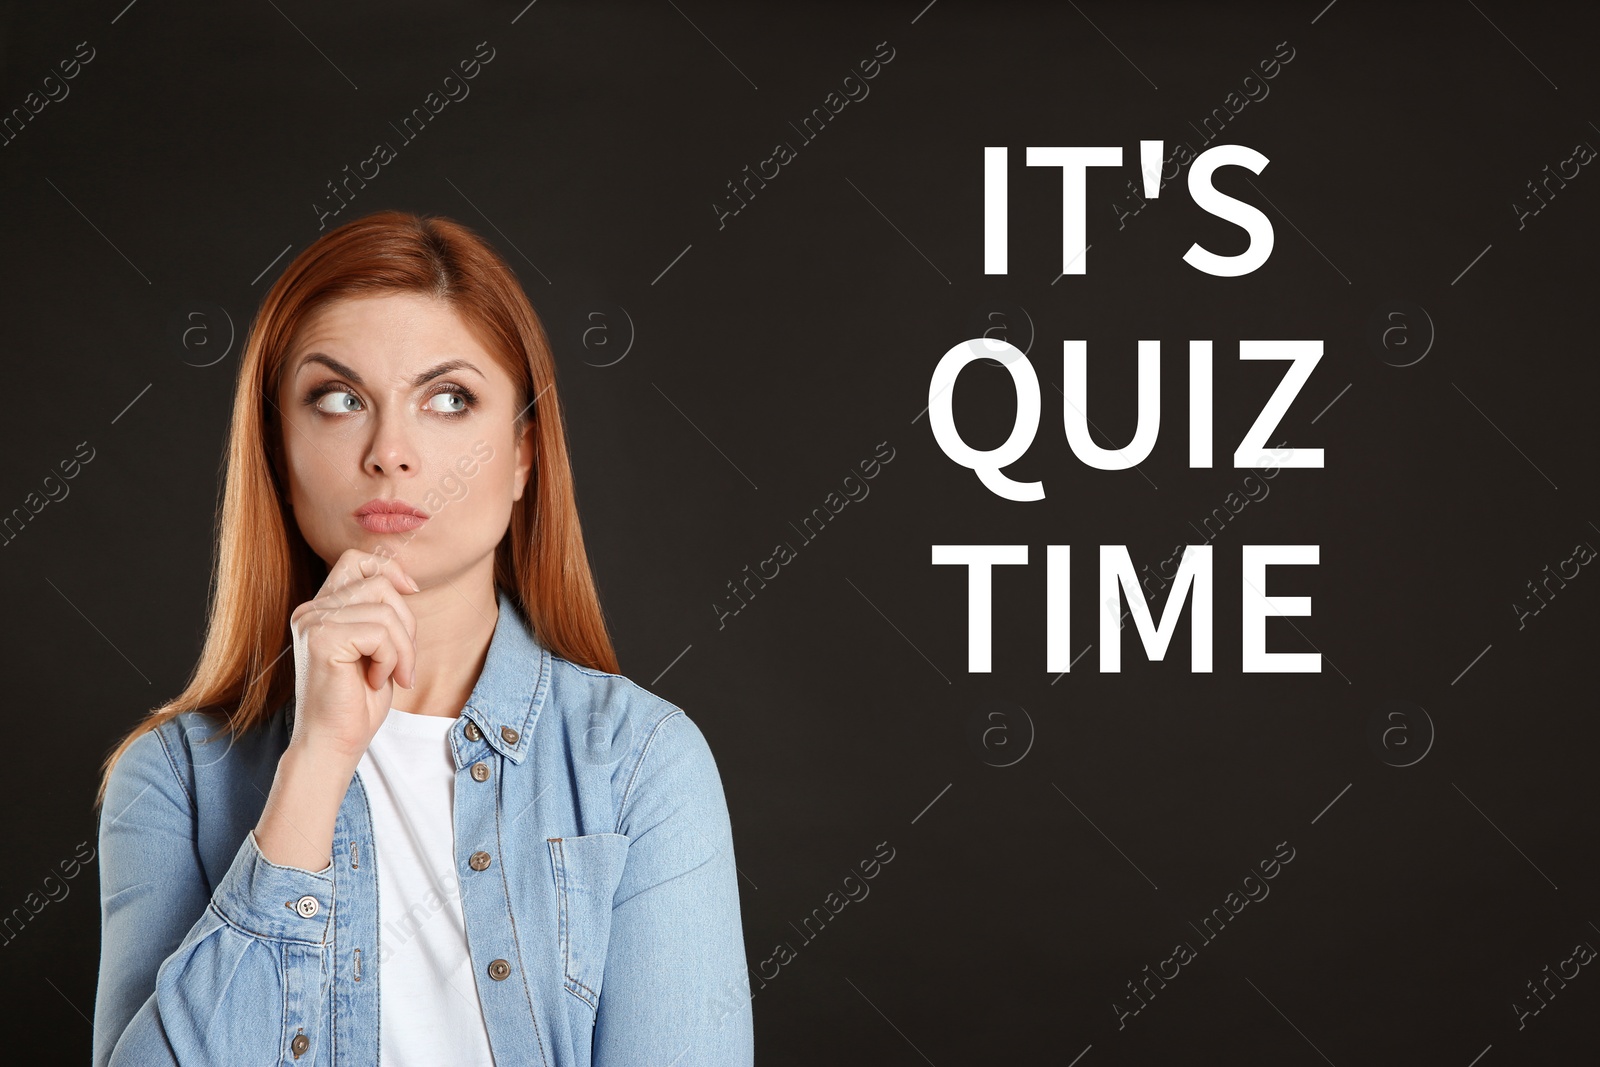 Image of Thoughtful woman and phrase IT'S QUIZ TIME on black background 